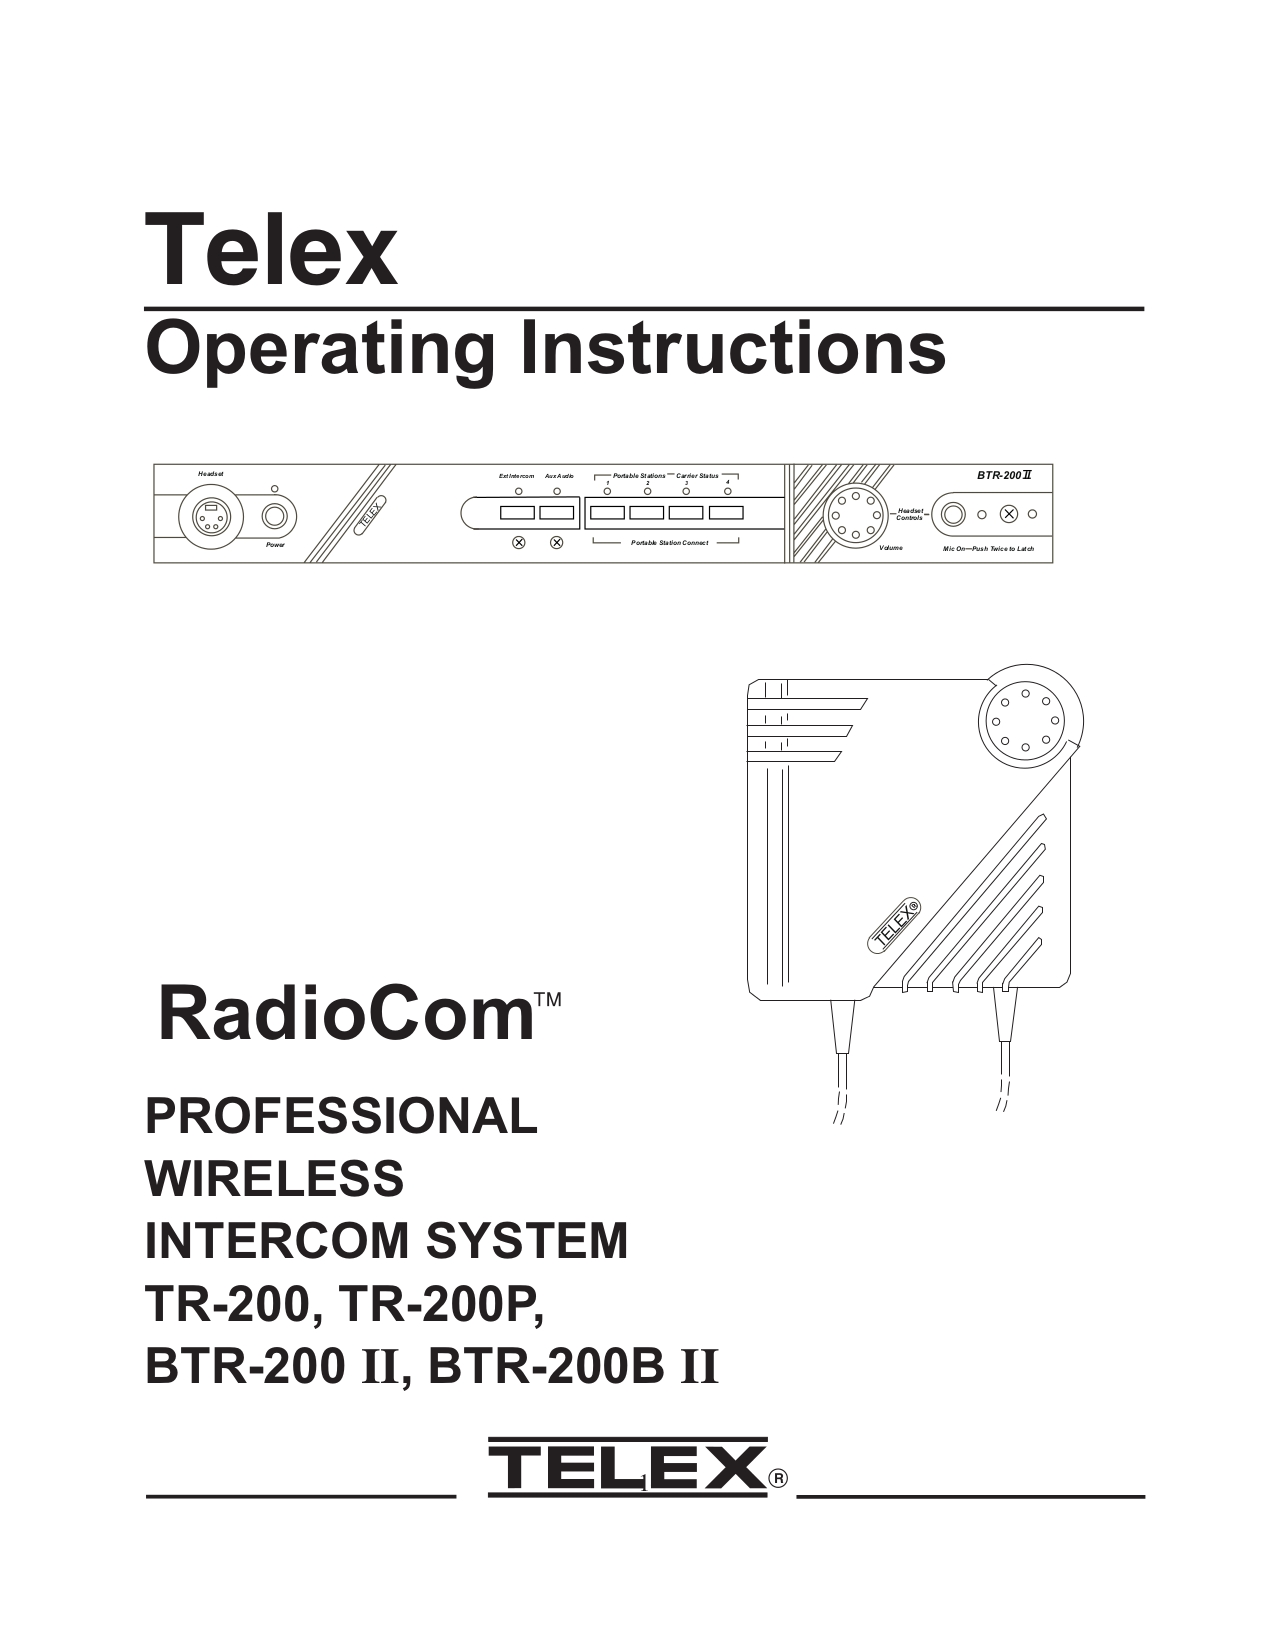 pdf for Telex Other RMS300 IntercomSystem manual